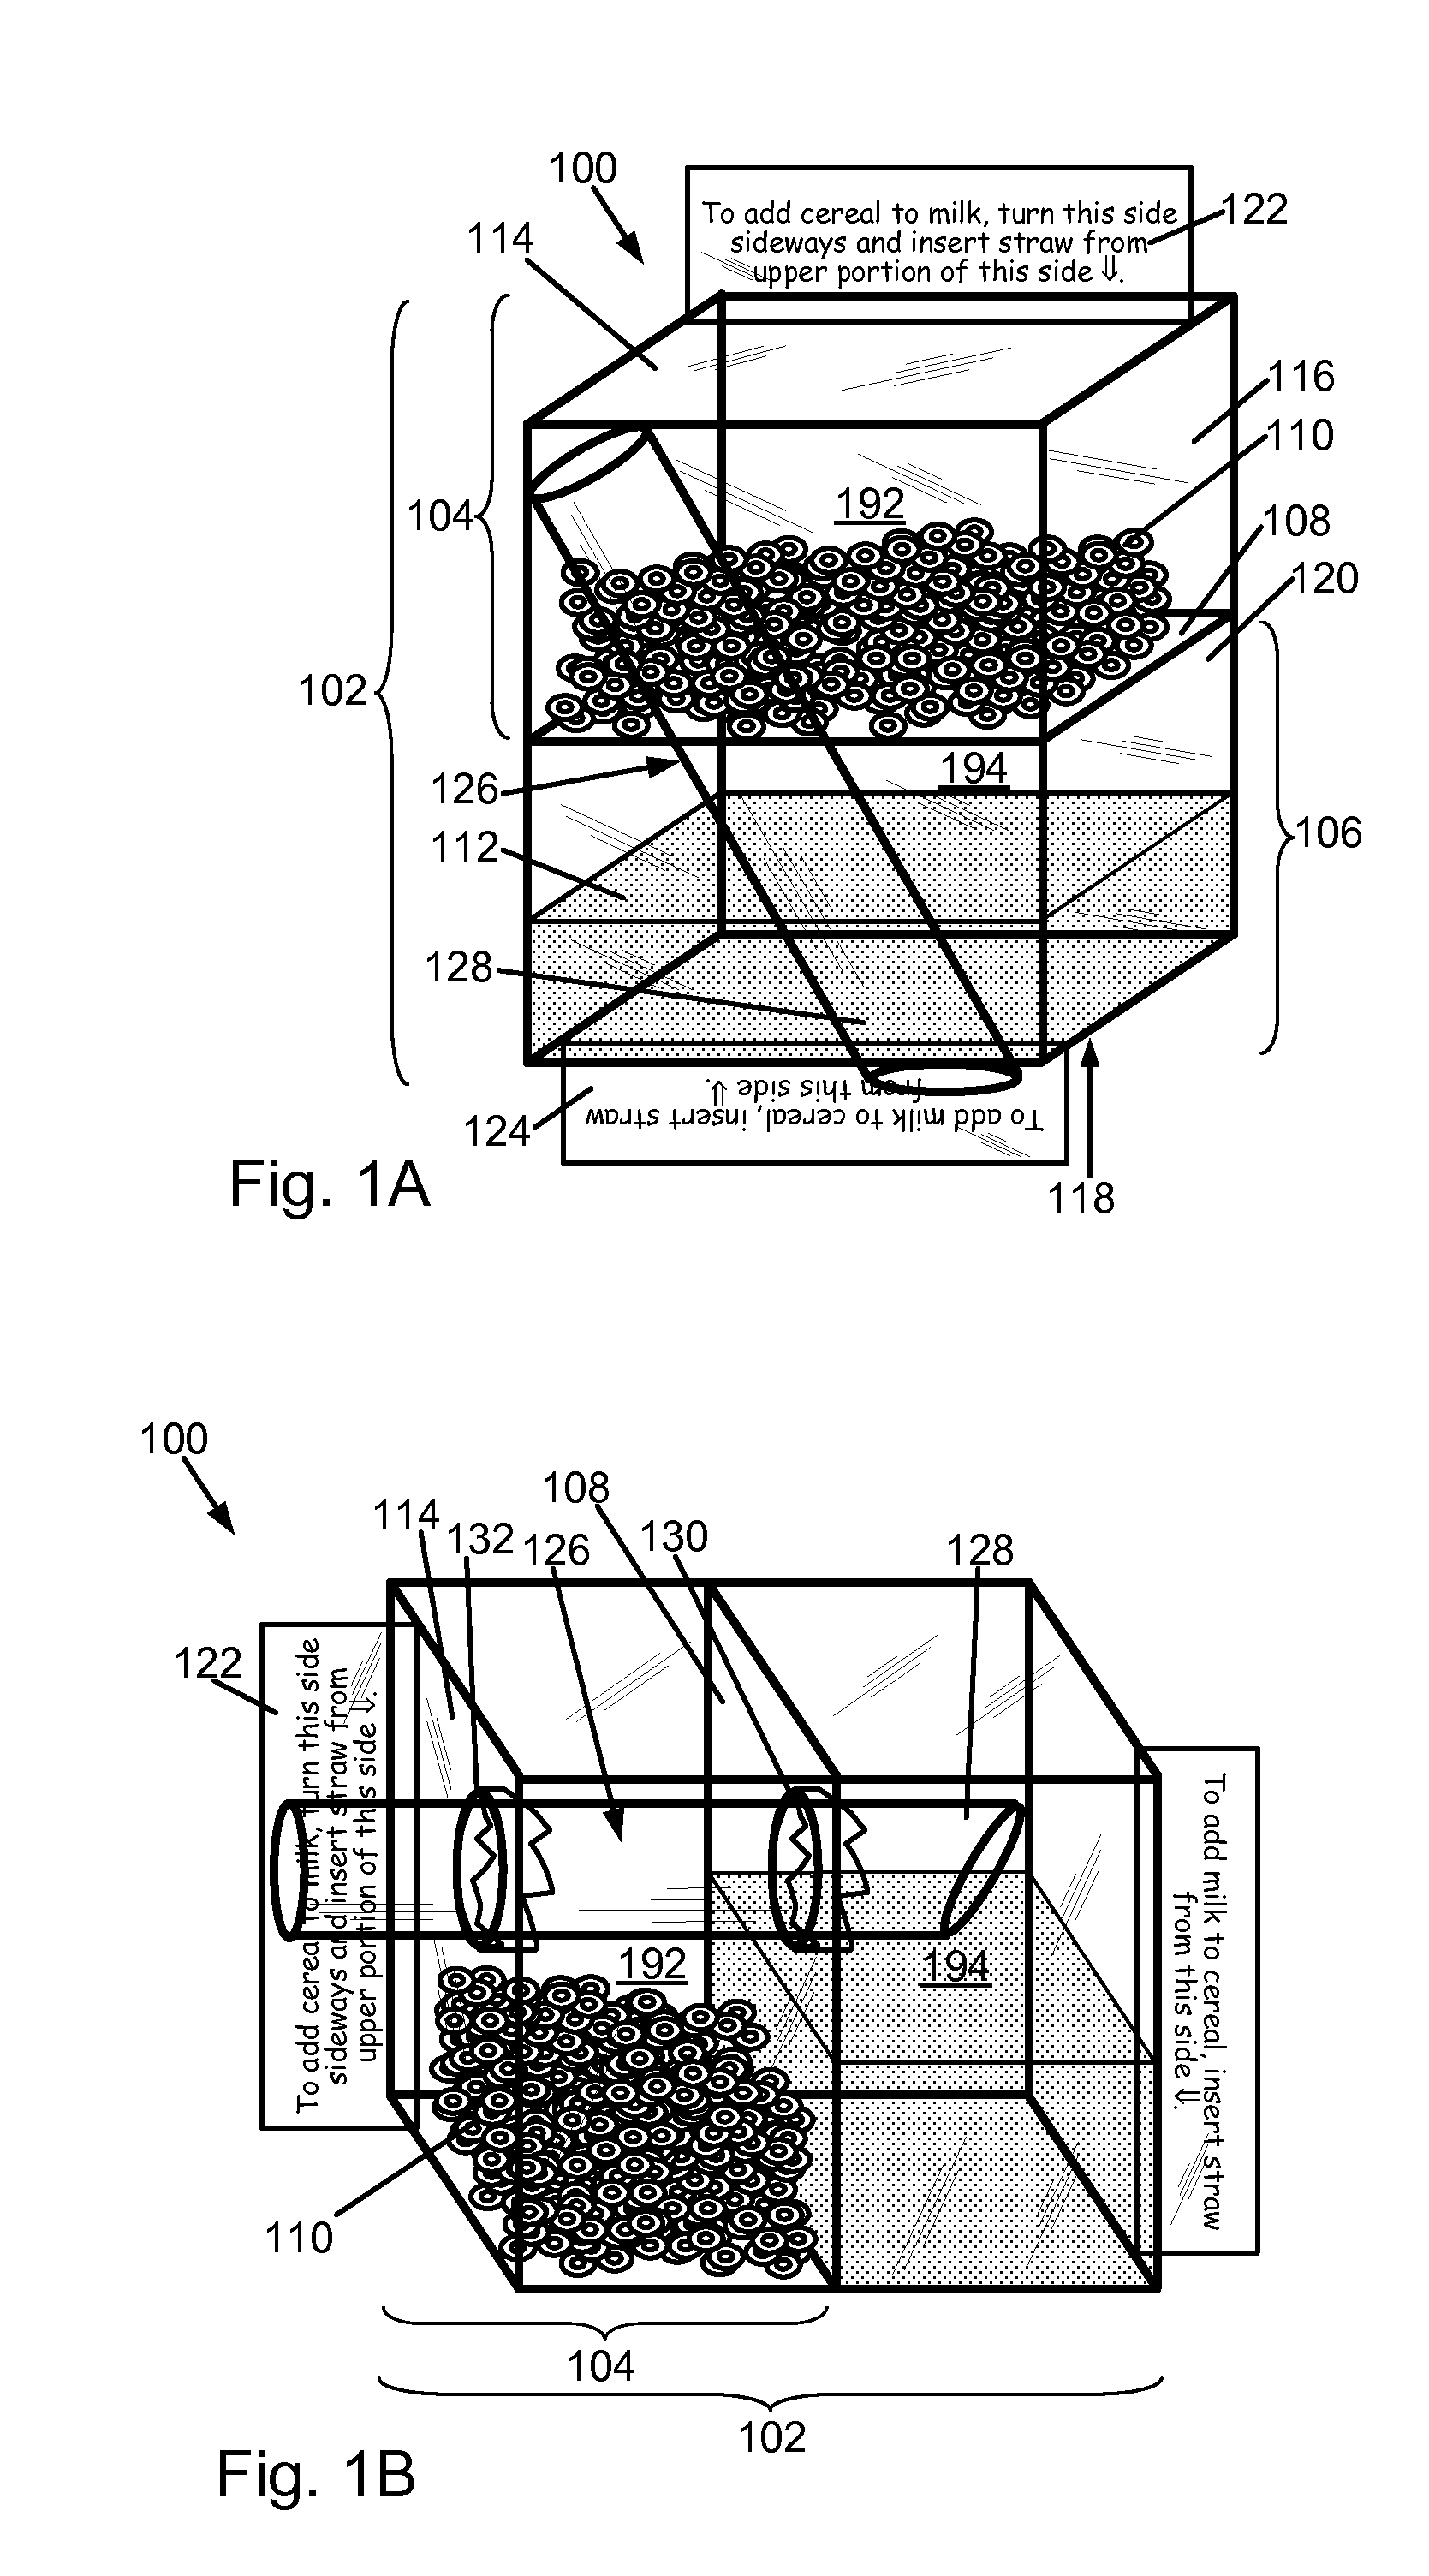 Apparatus and method for manufacturing a package that includes edible substances